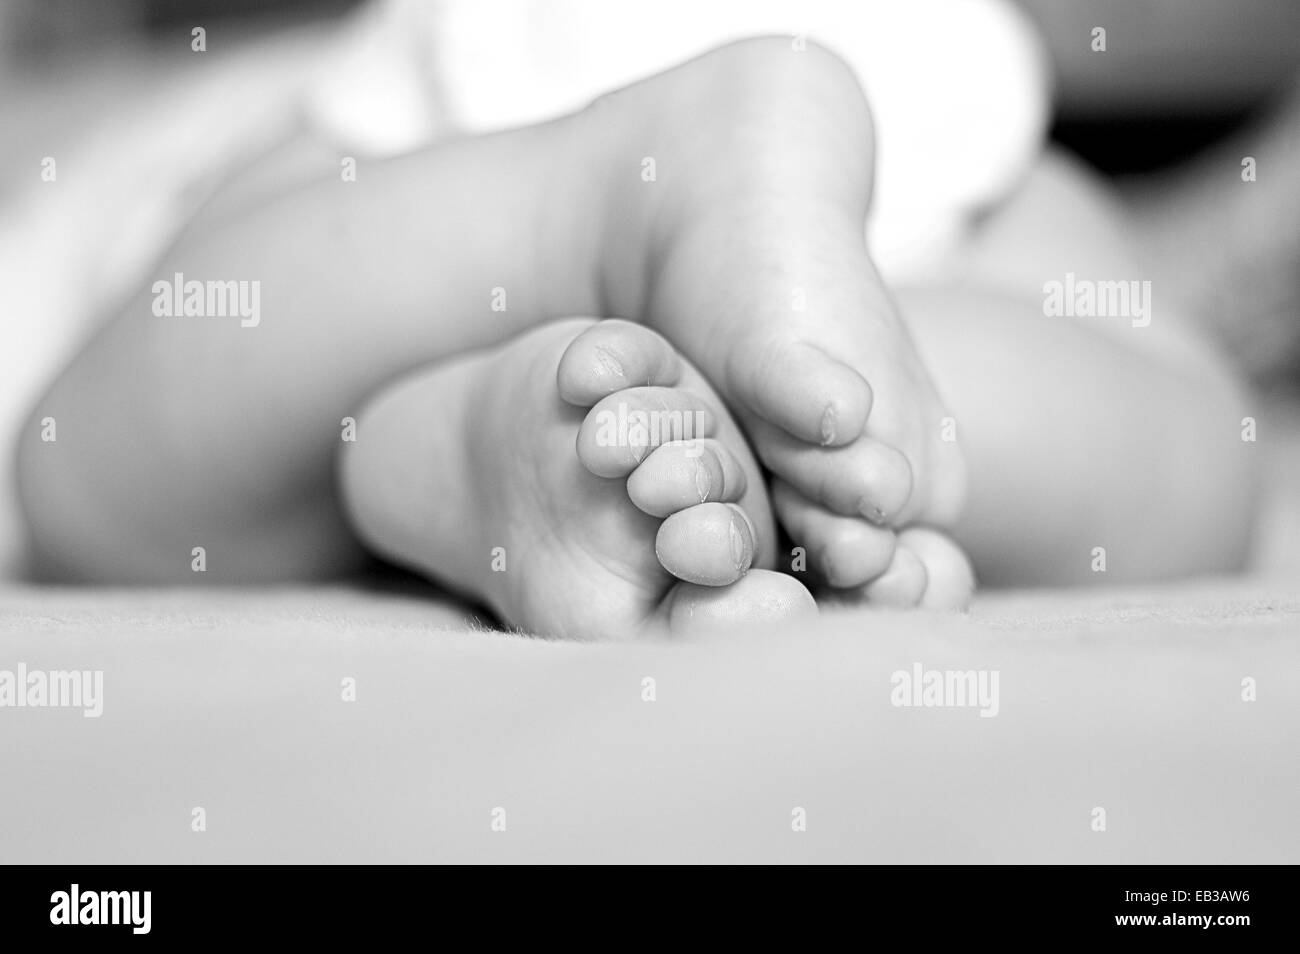 Close-up of Baby Boy's feet Banque D'Images